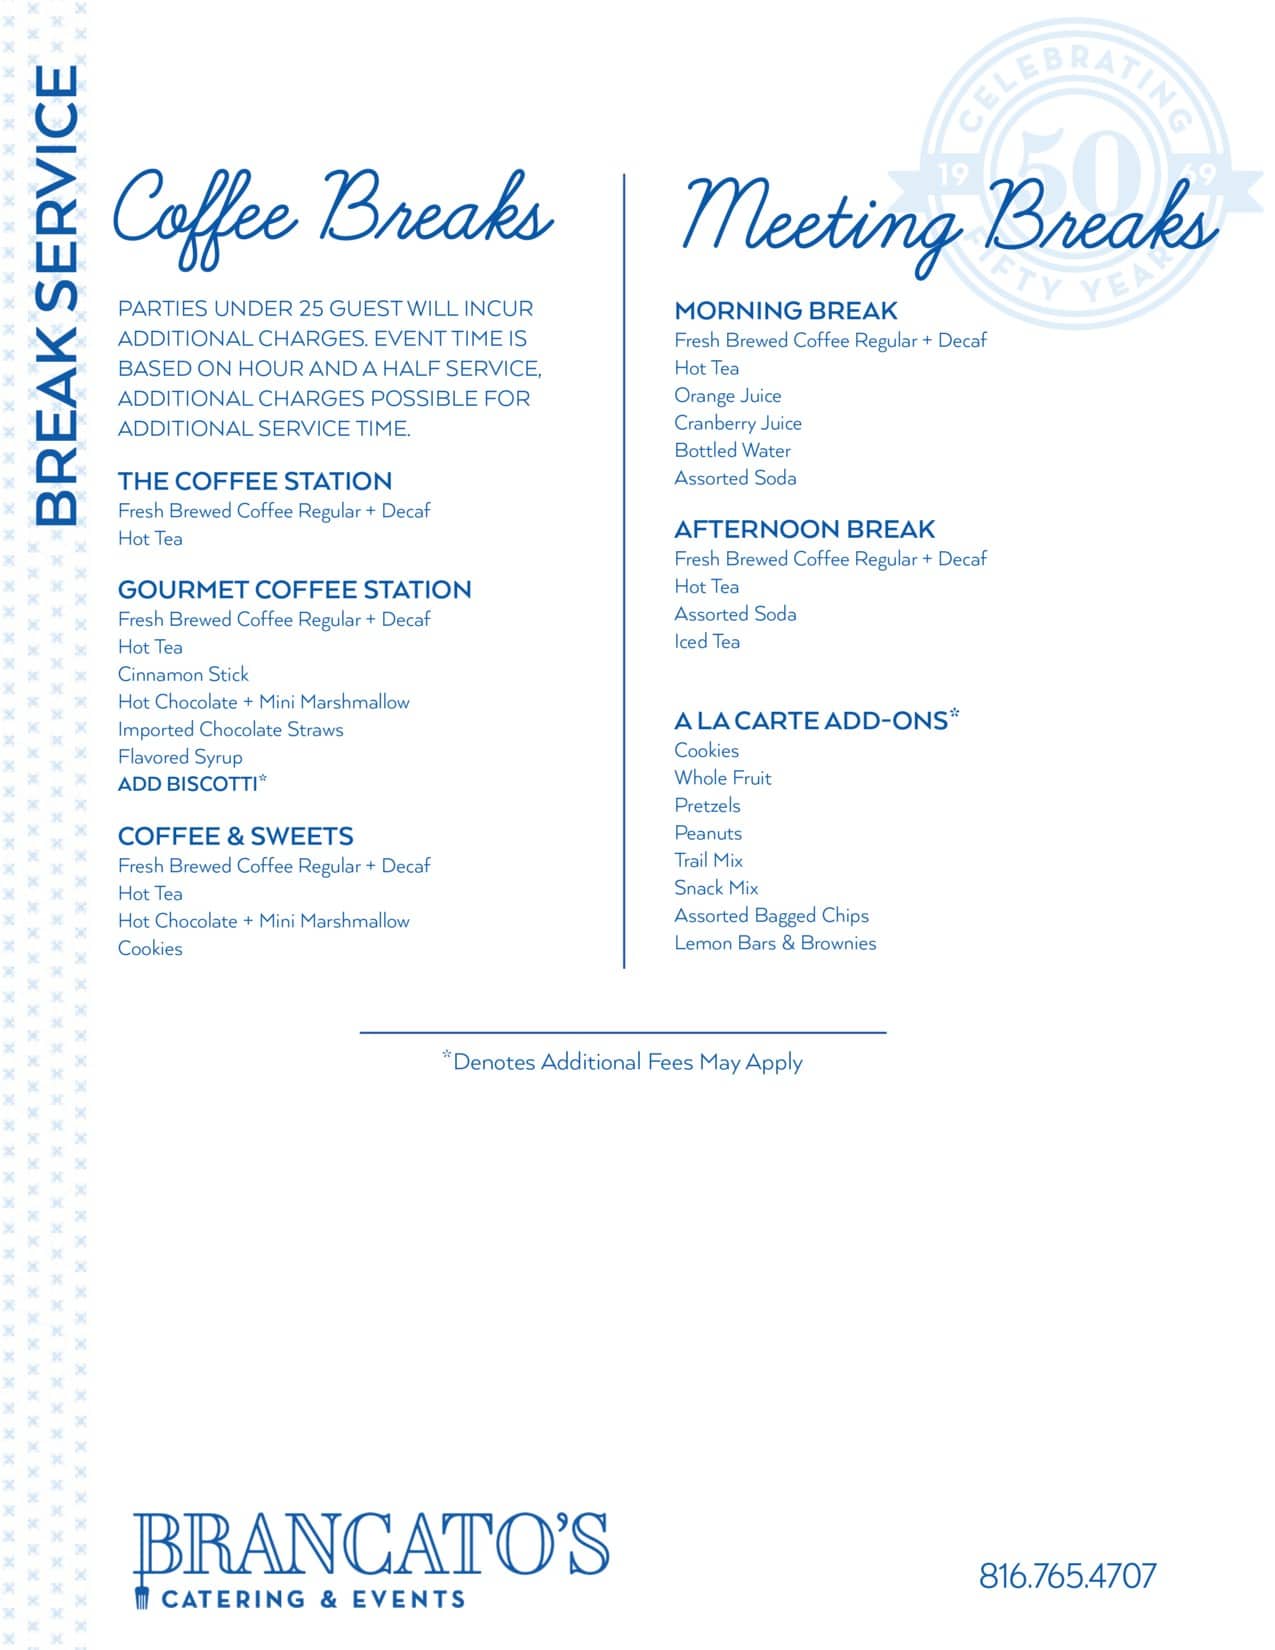 coffee break service and supplies in wisconsin